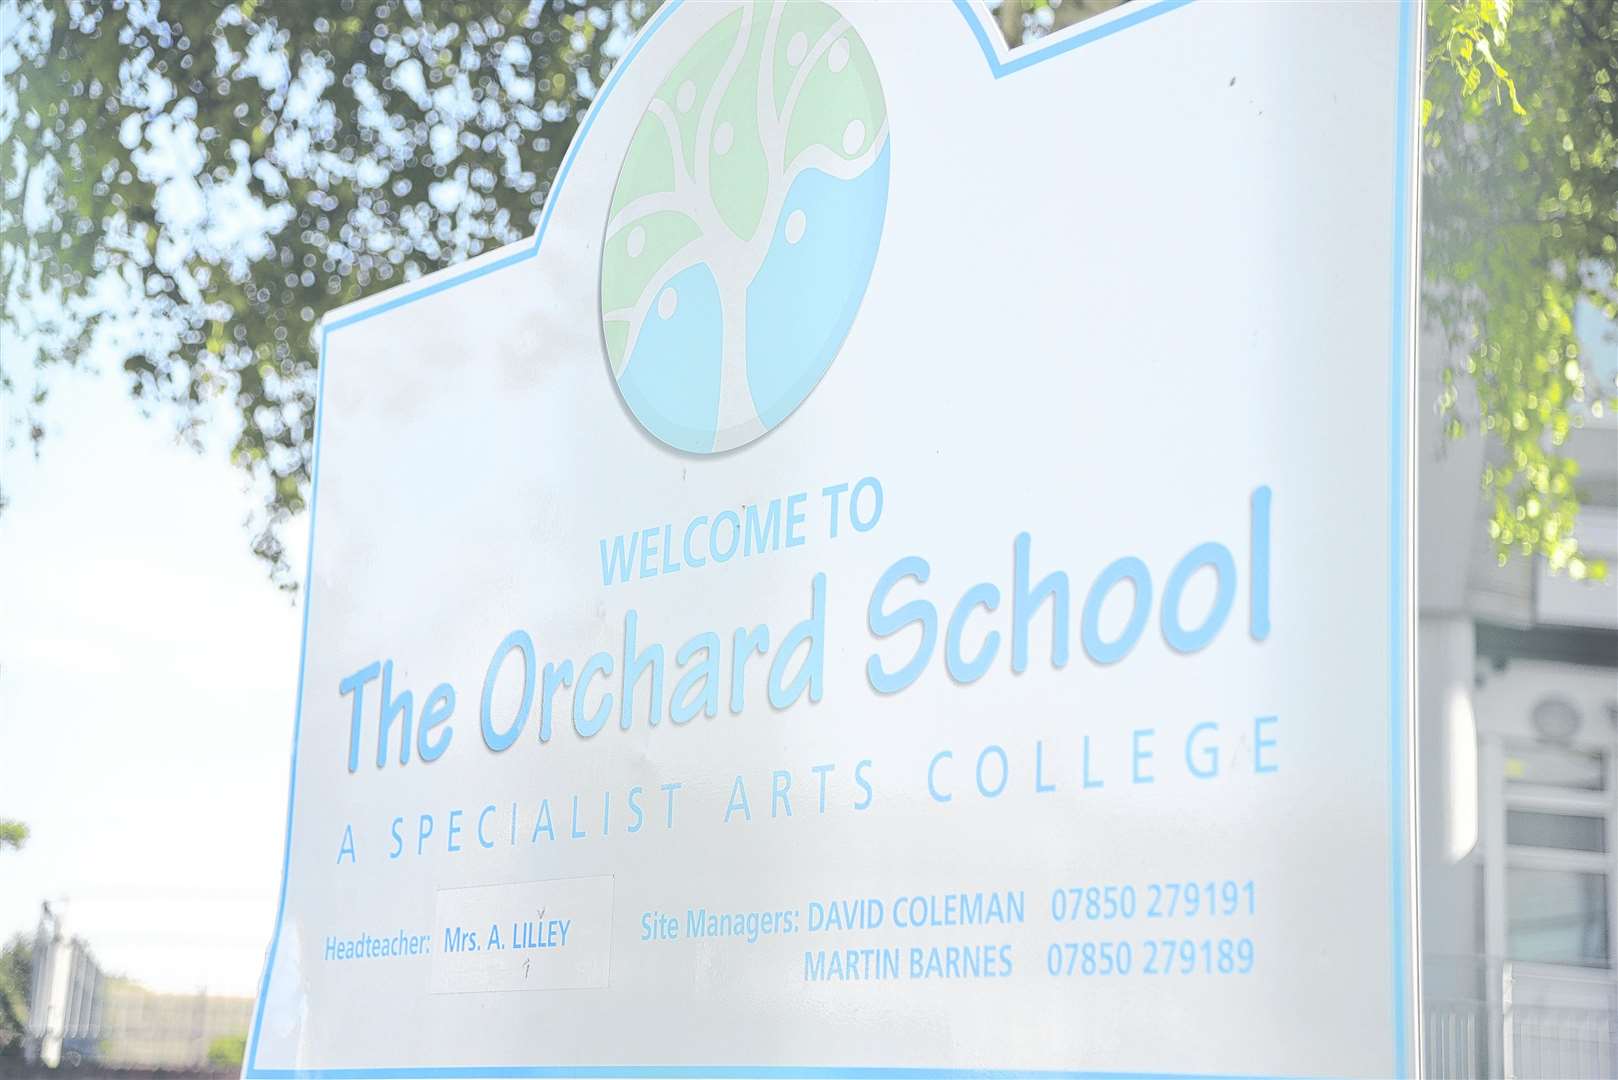 The Orchard School, Cambridge Road, Canterbury Picture: Ruth Cuerden